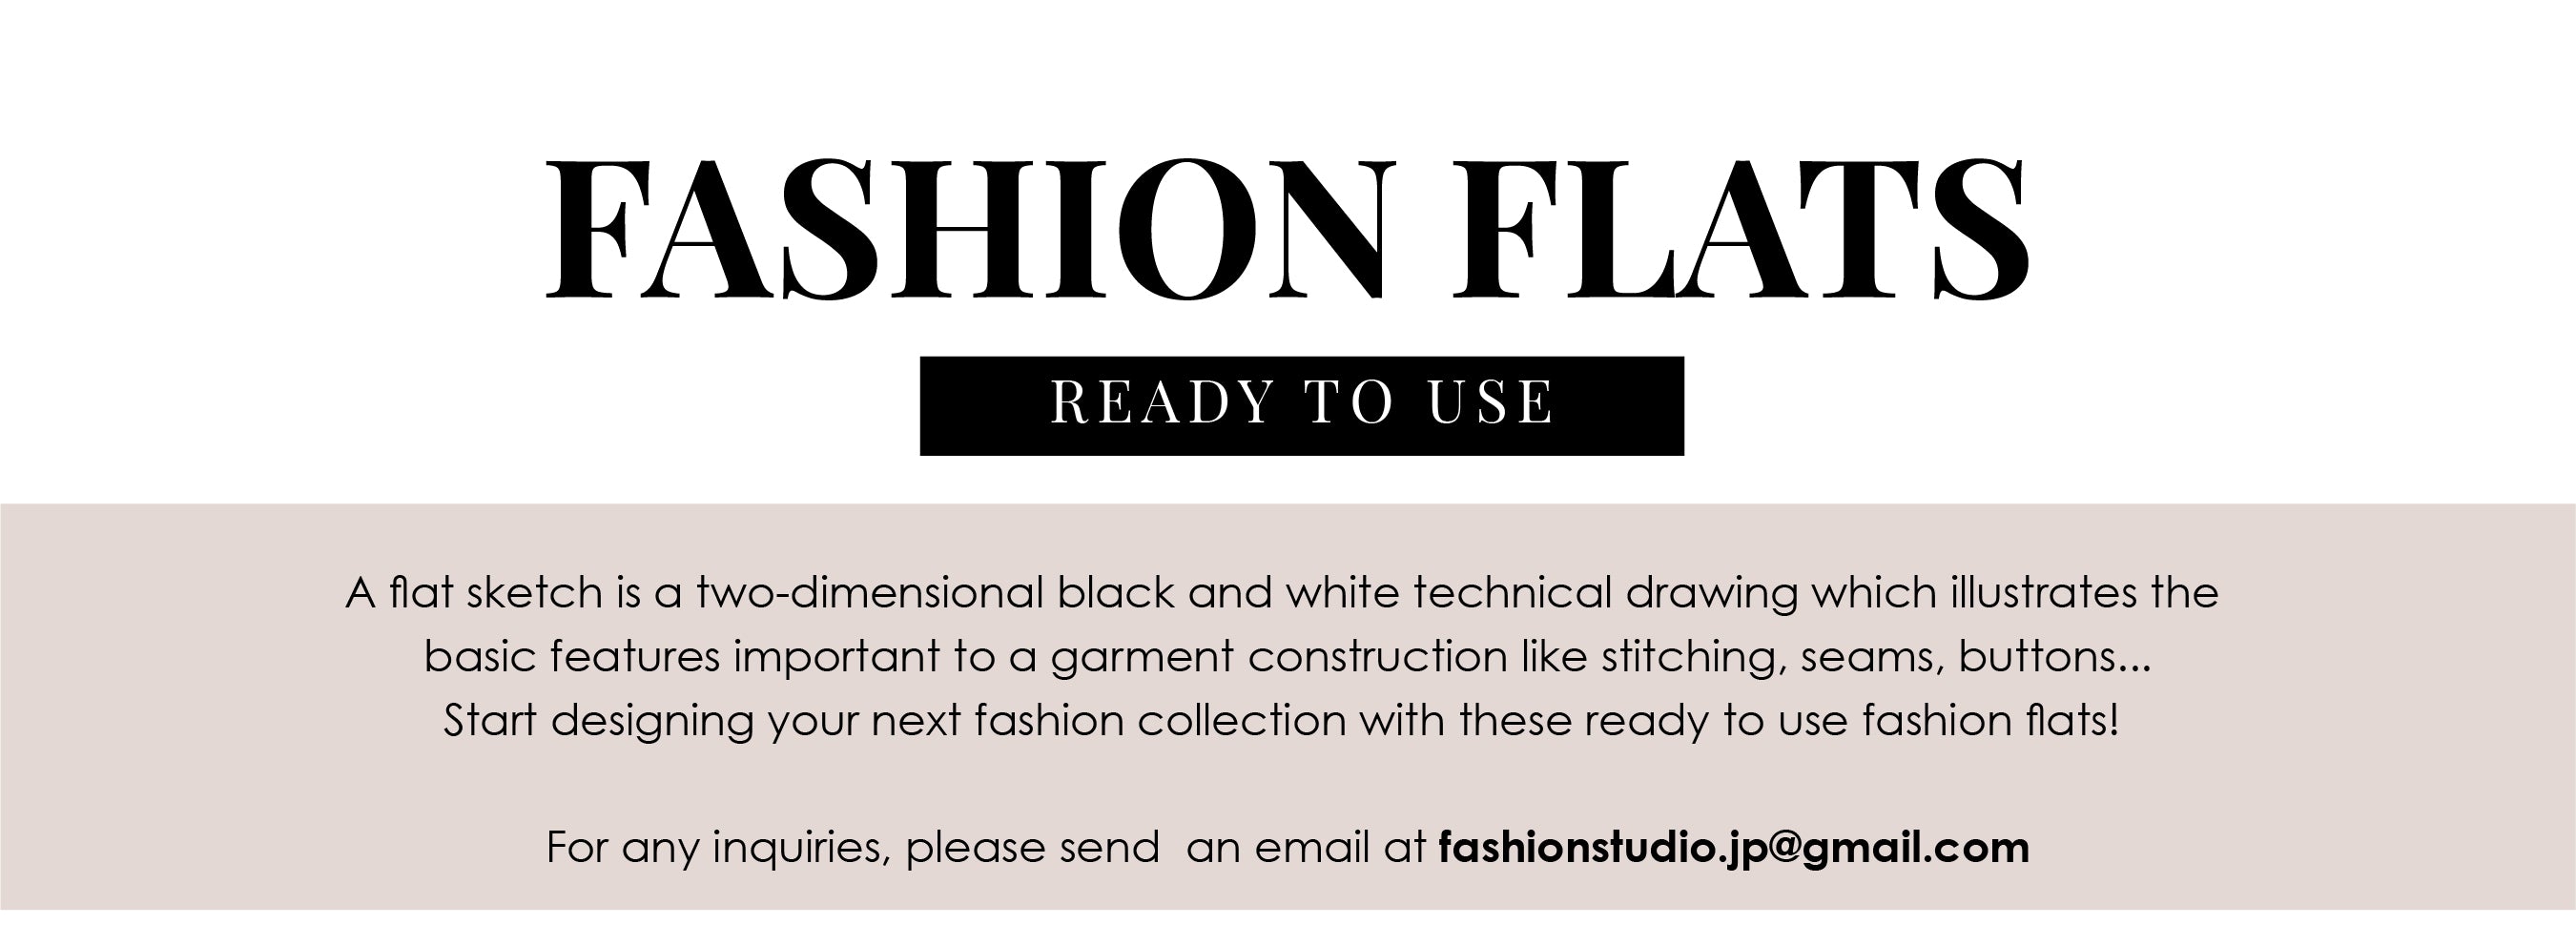 Let's Talk Fashion Sketches and Technical Sketches